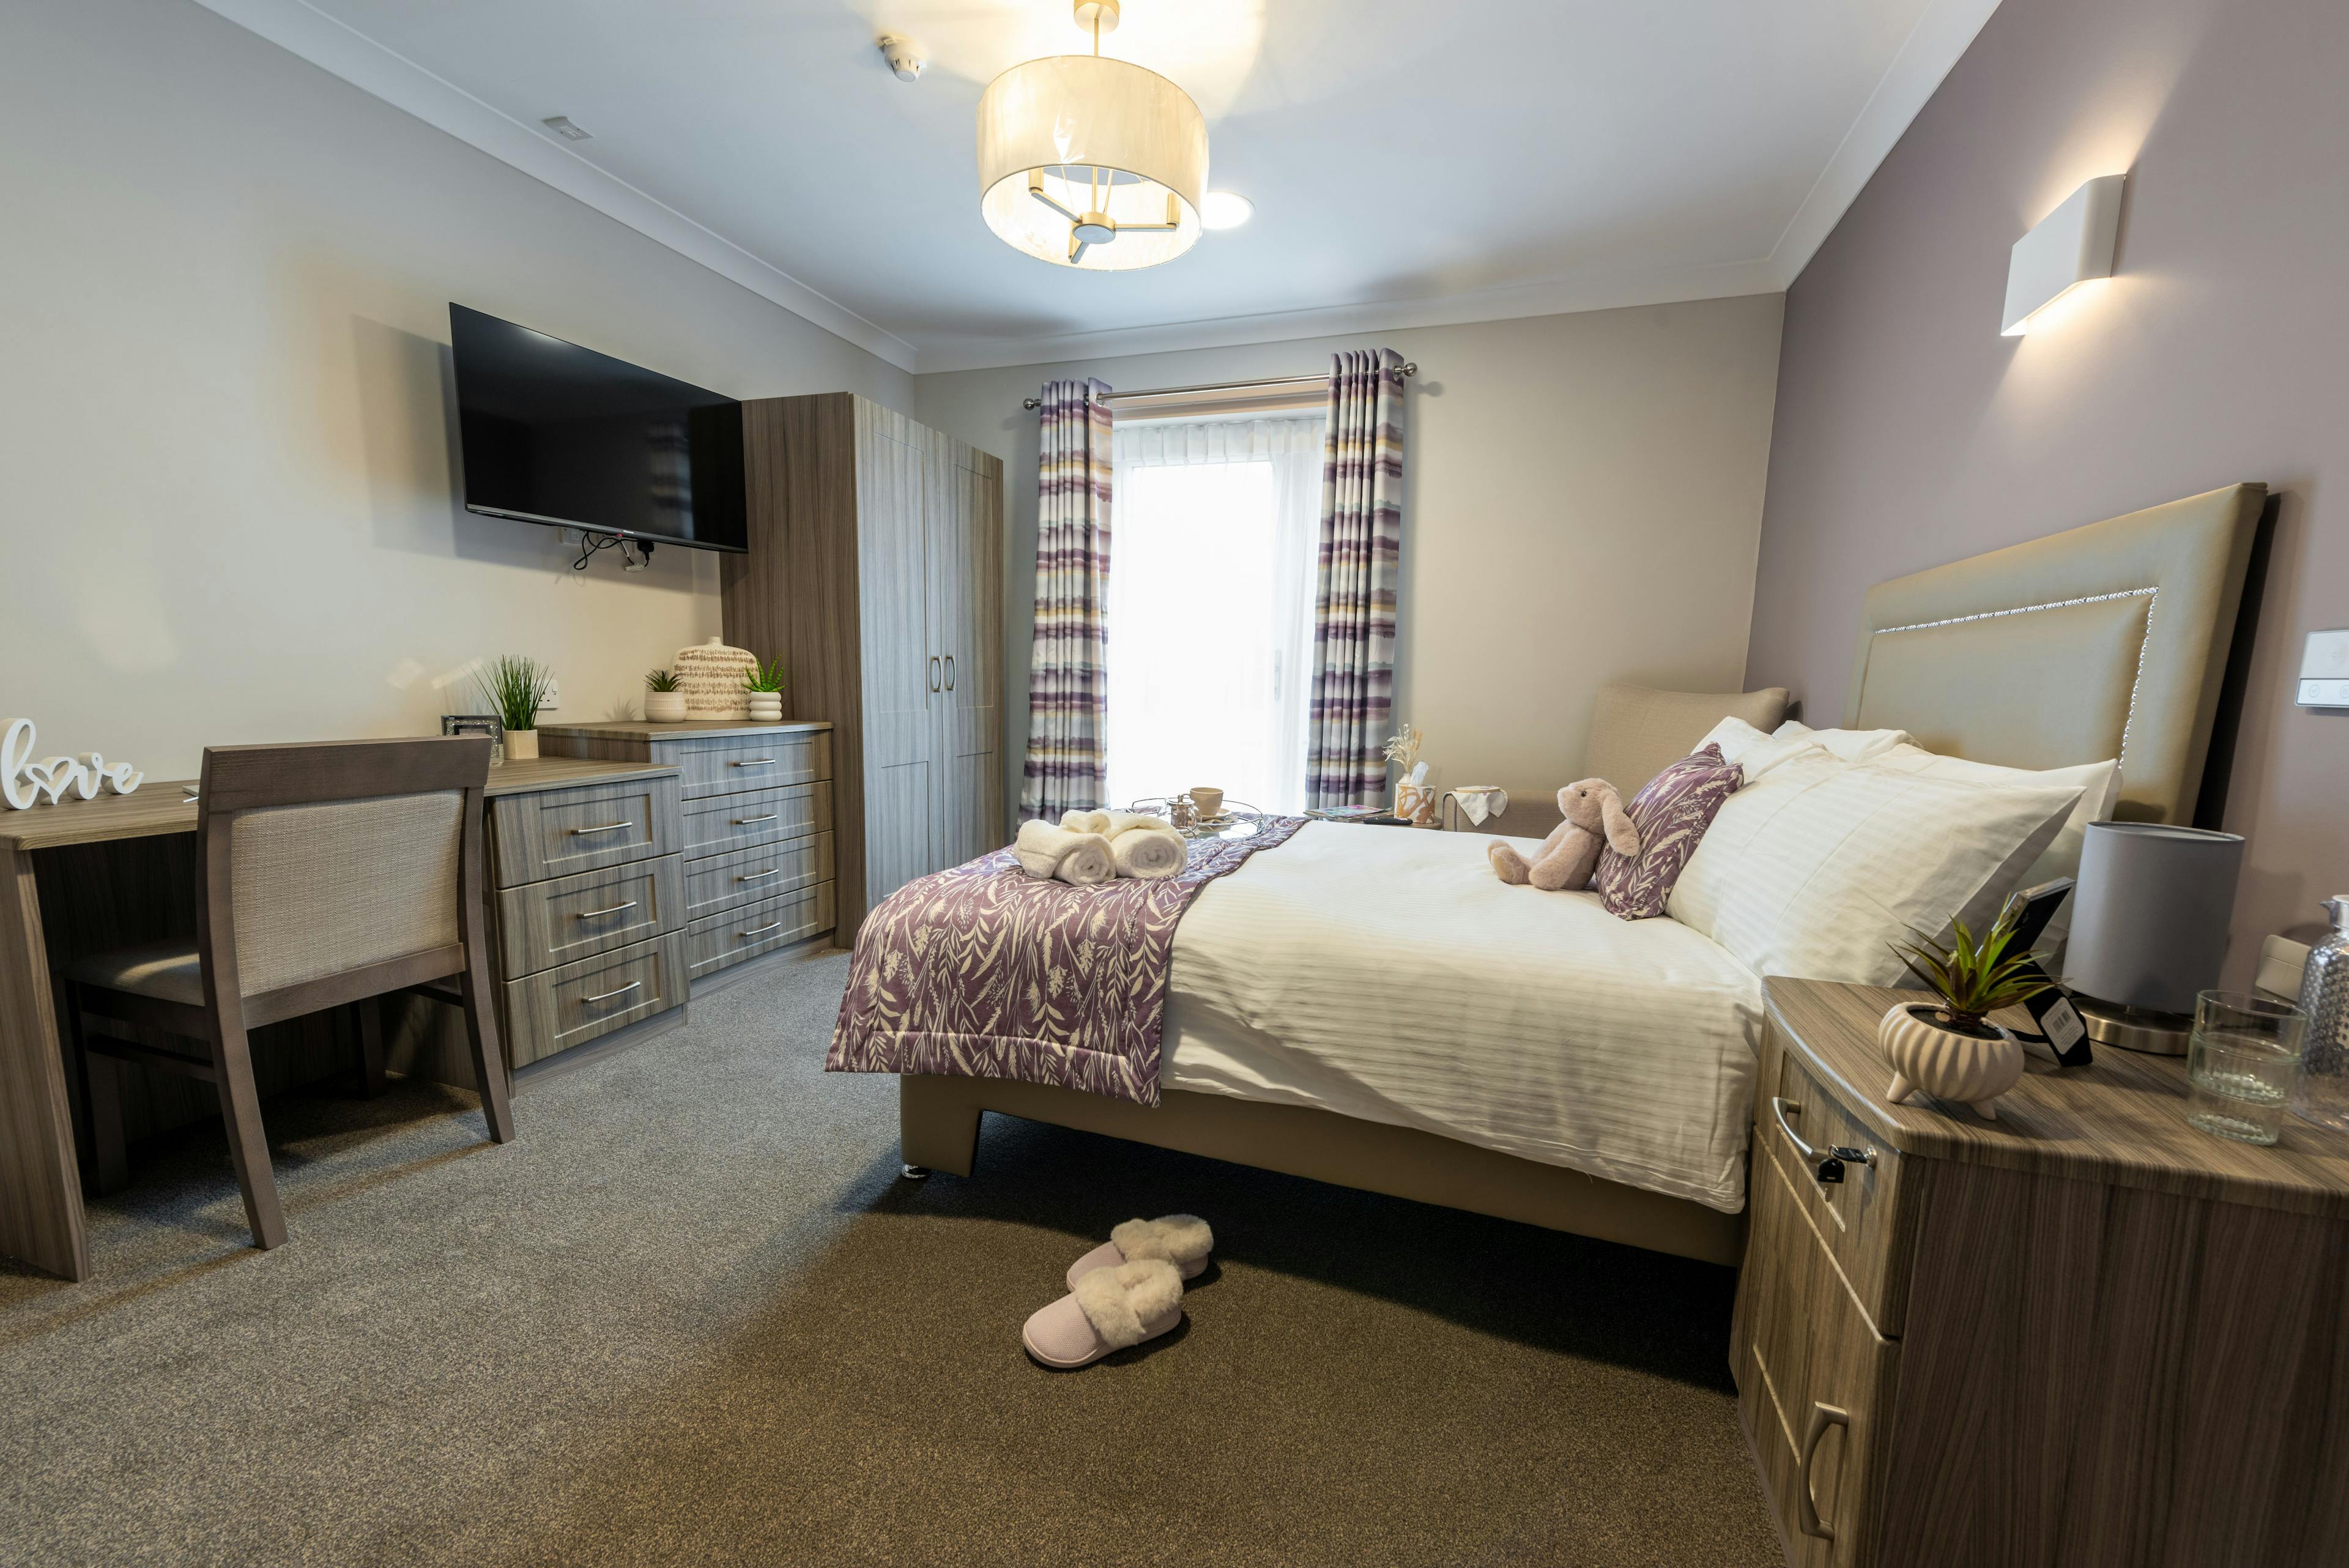 Bedroom of Astley View care home in Chorley